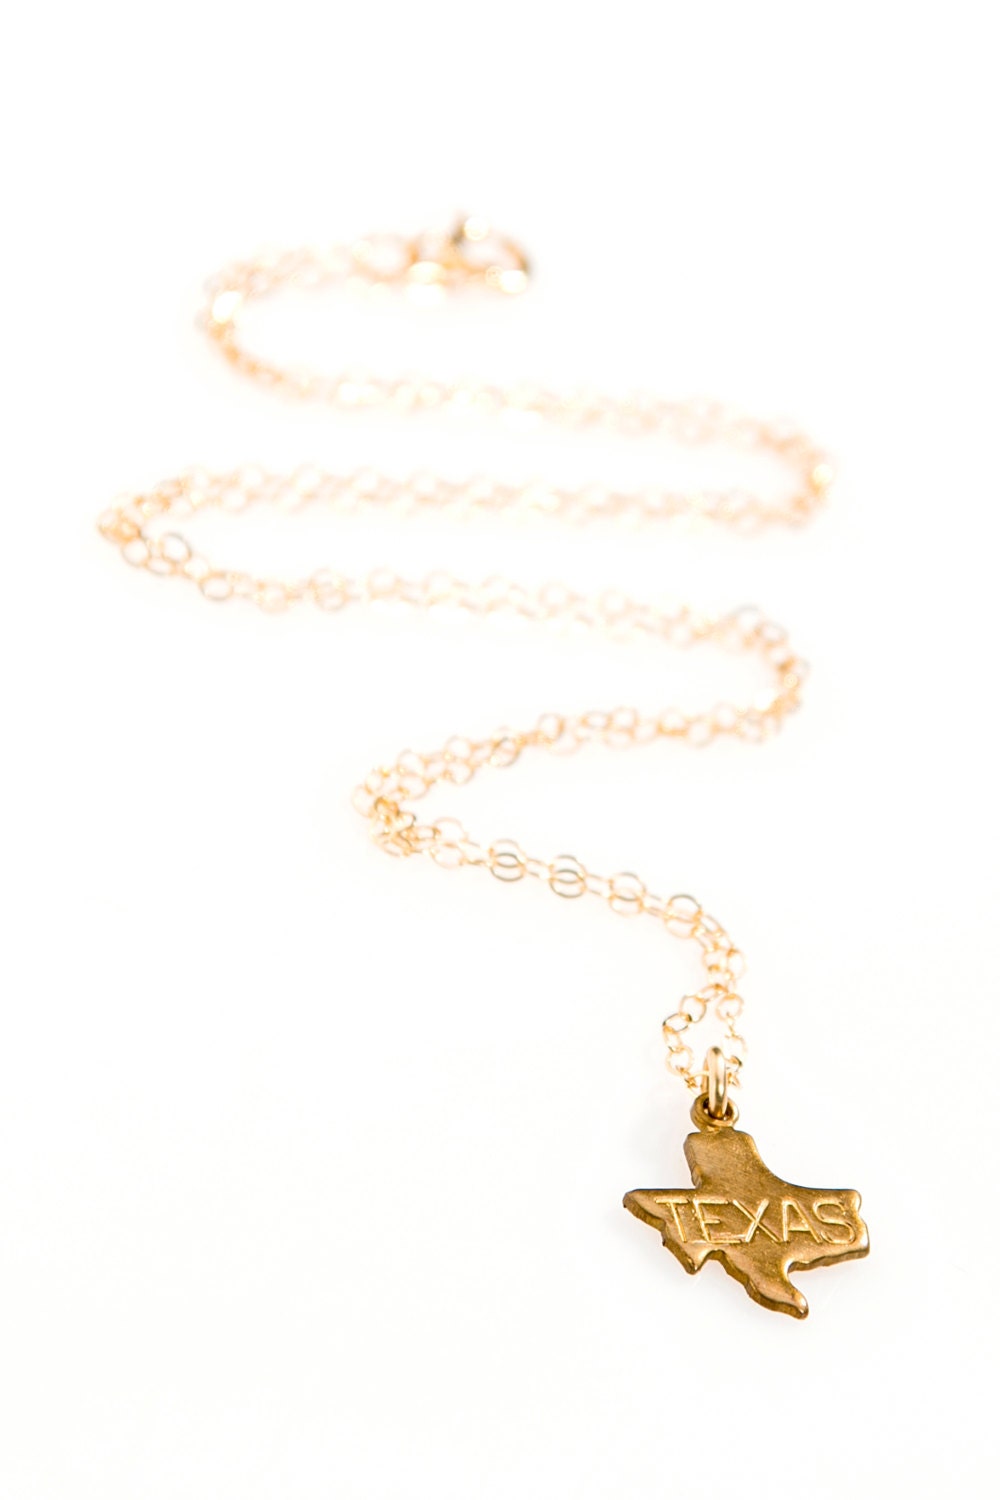 State Charm Necklace available in all 50 states